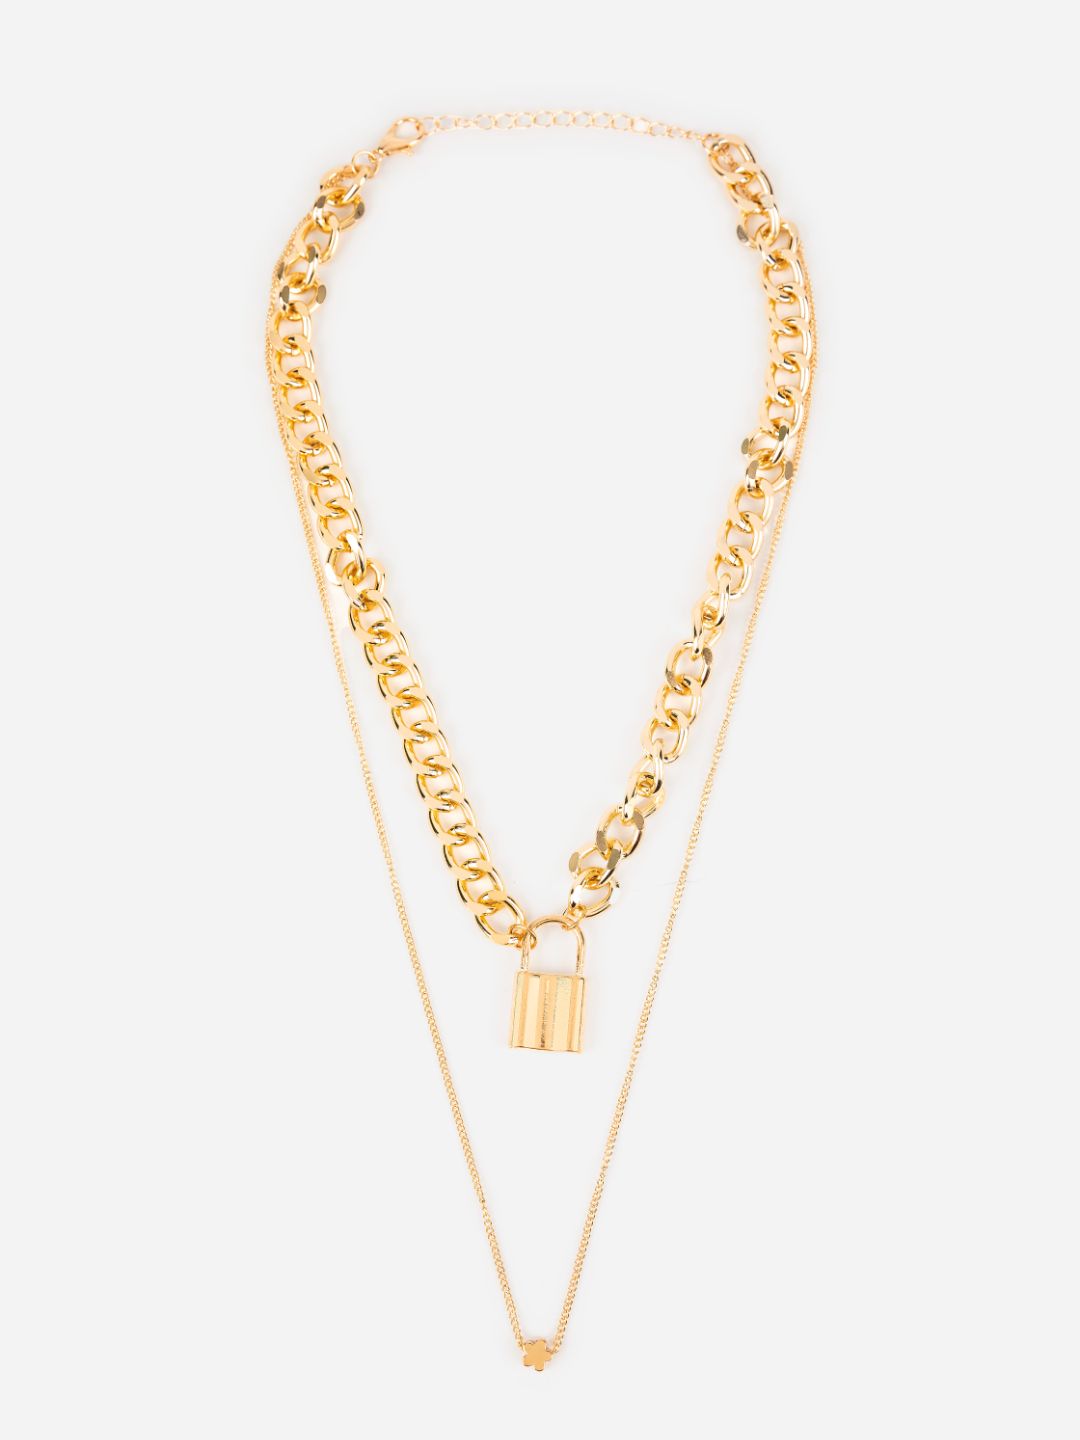 Dual-Layered Floral Lock Link Gold-Plated Necklace